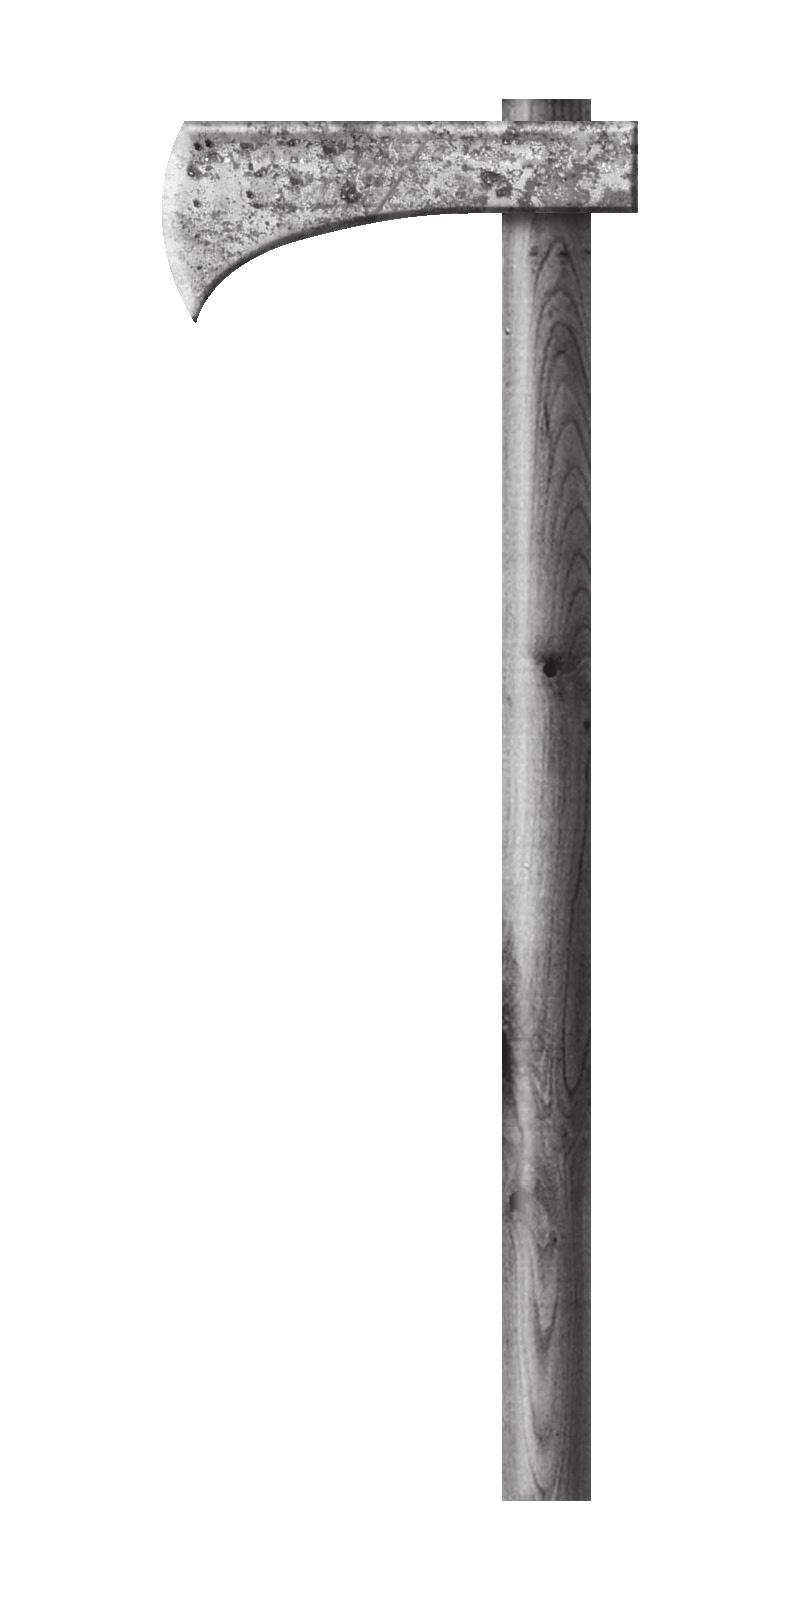 Dwarven battle axes usually consist of a double-edged blade, often with a spike on top. Battle axes are employed by foot soldiers with great effect versus mounted opponents.